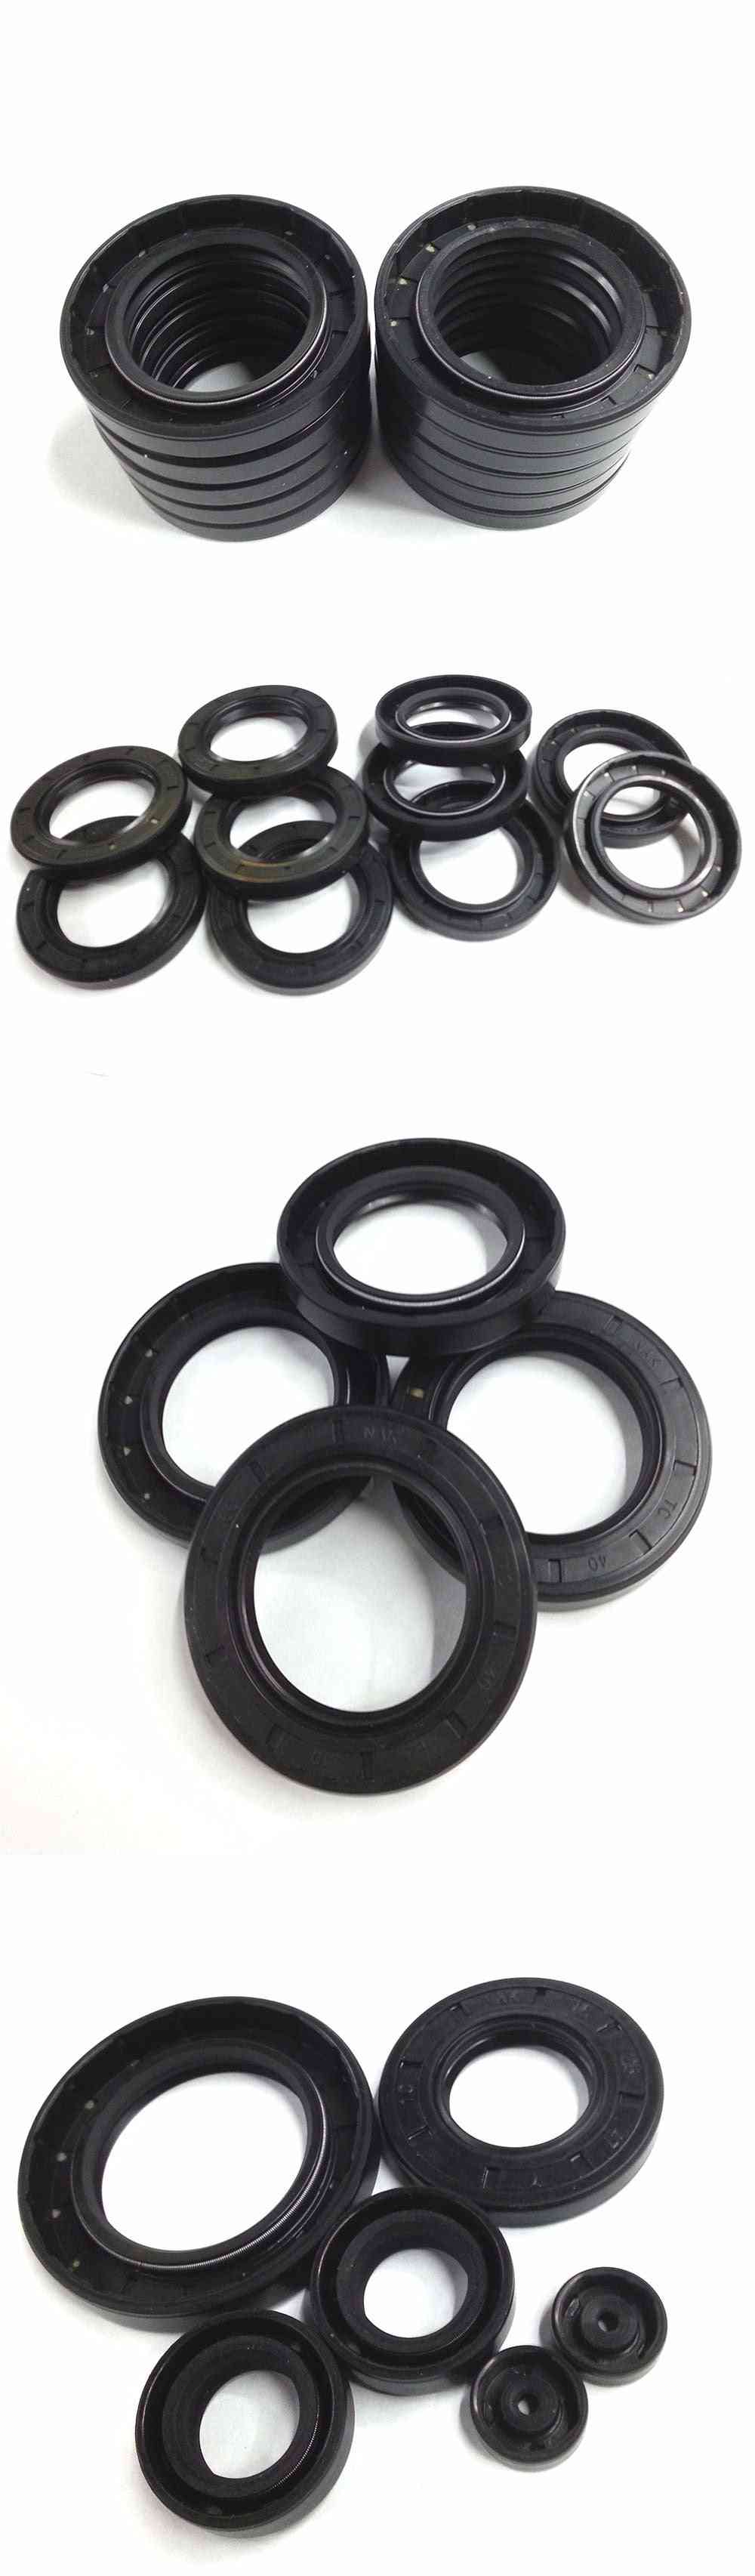 Double Lip Nbr Shaft Oil Seal With Garter Spring